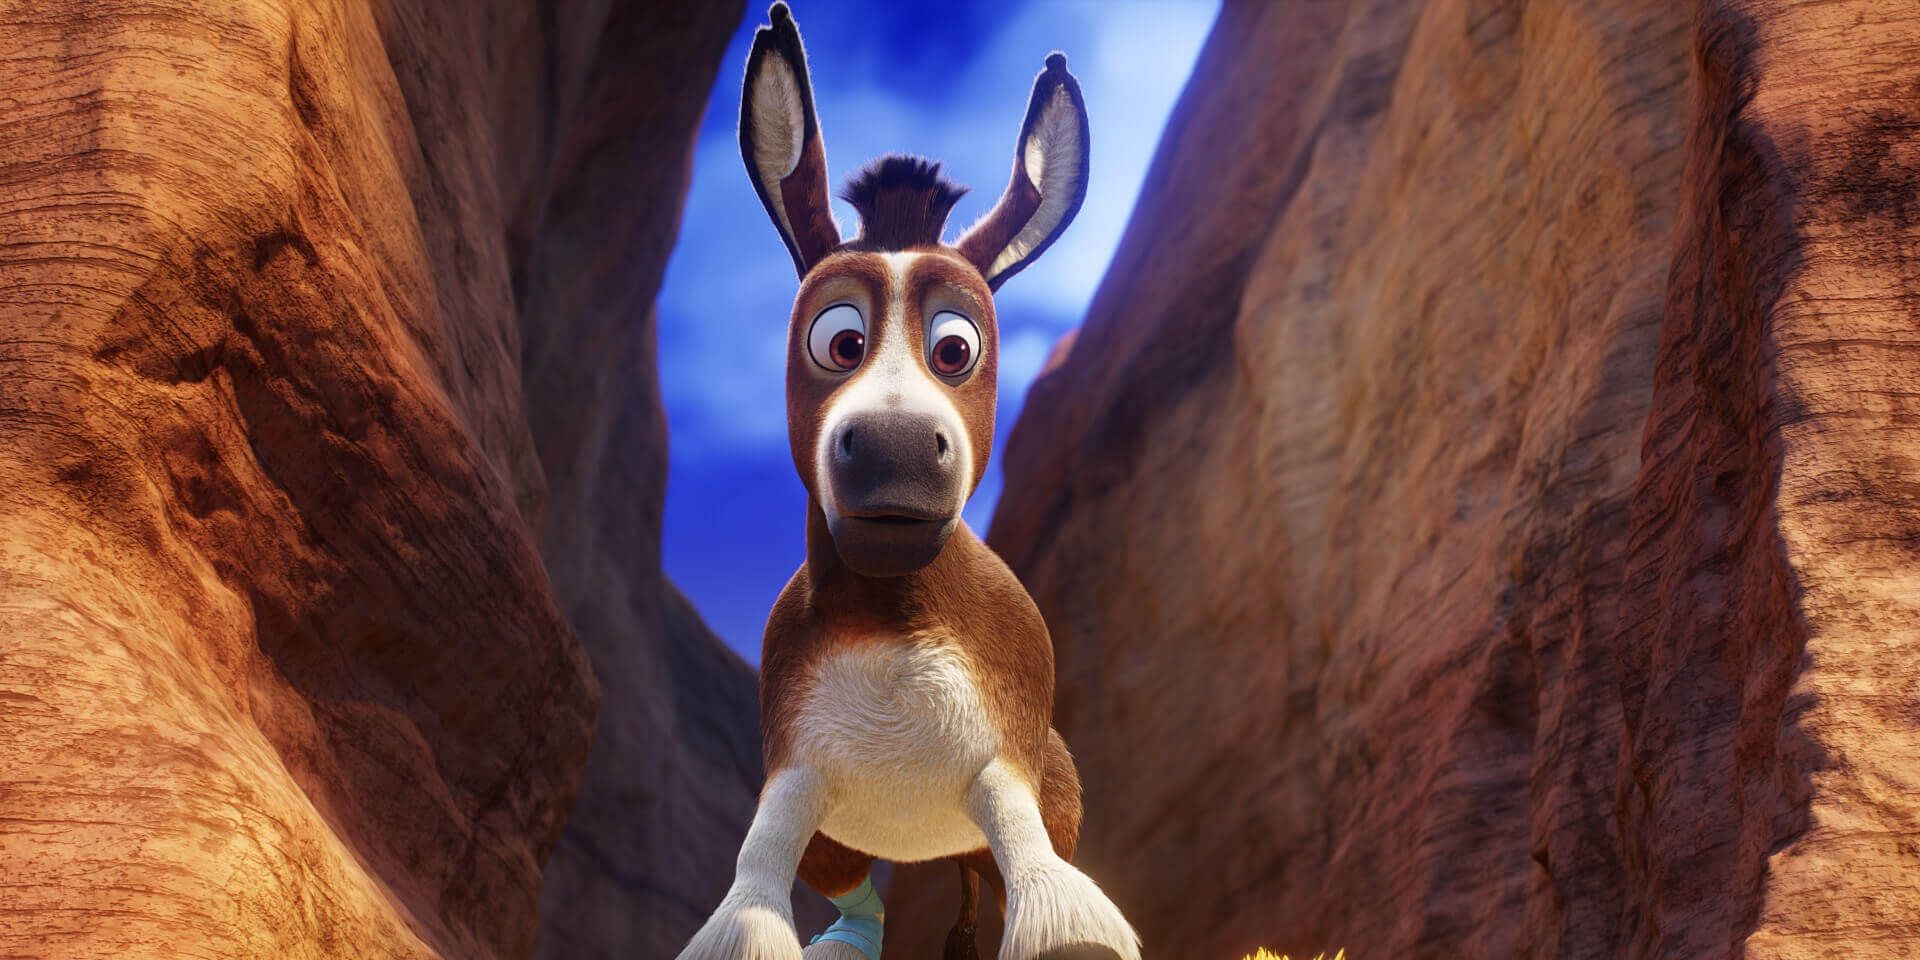 Steven Yeun as Bo the Donkey in The Star